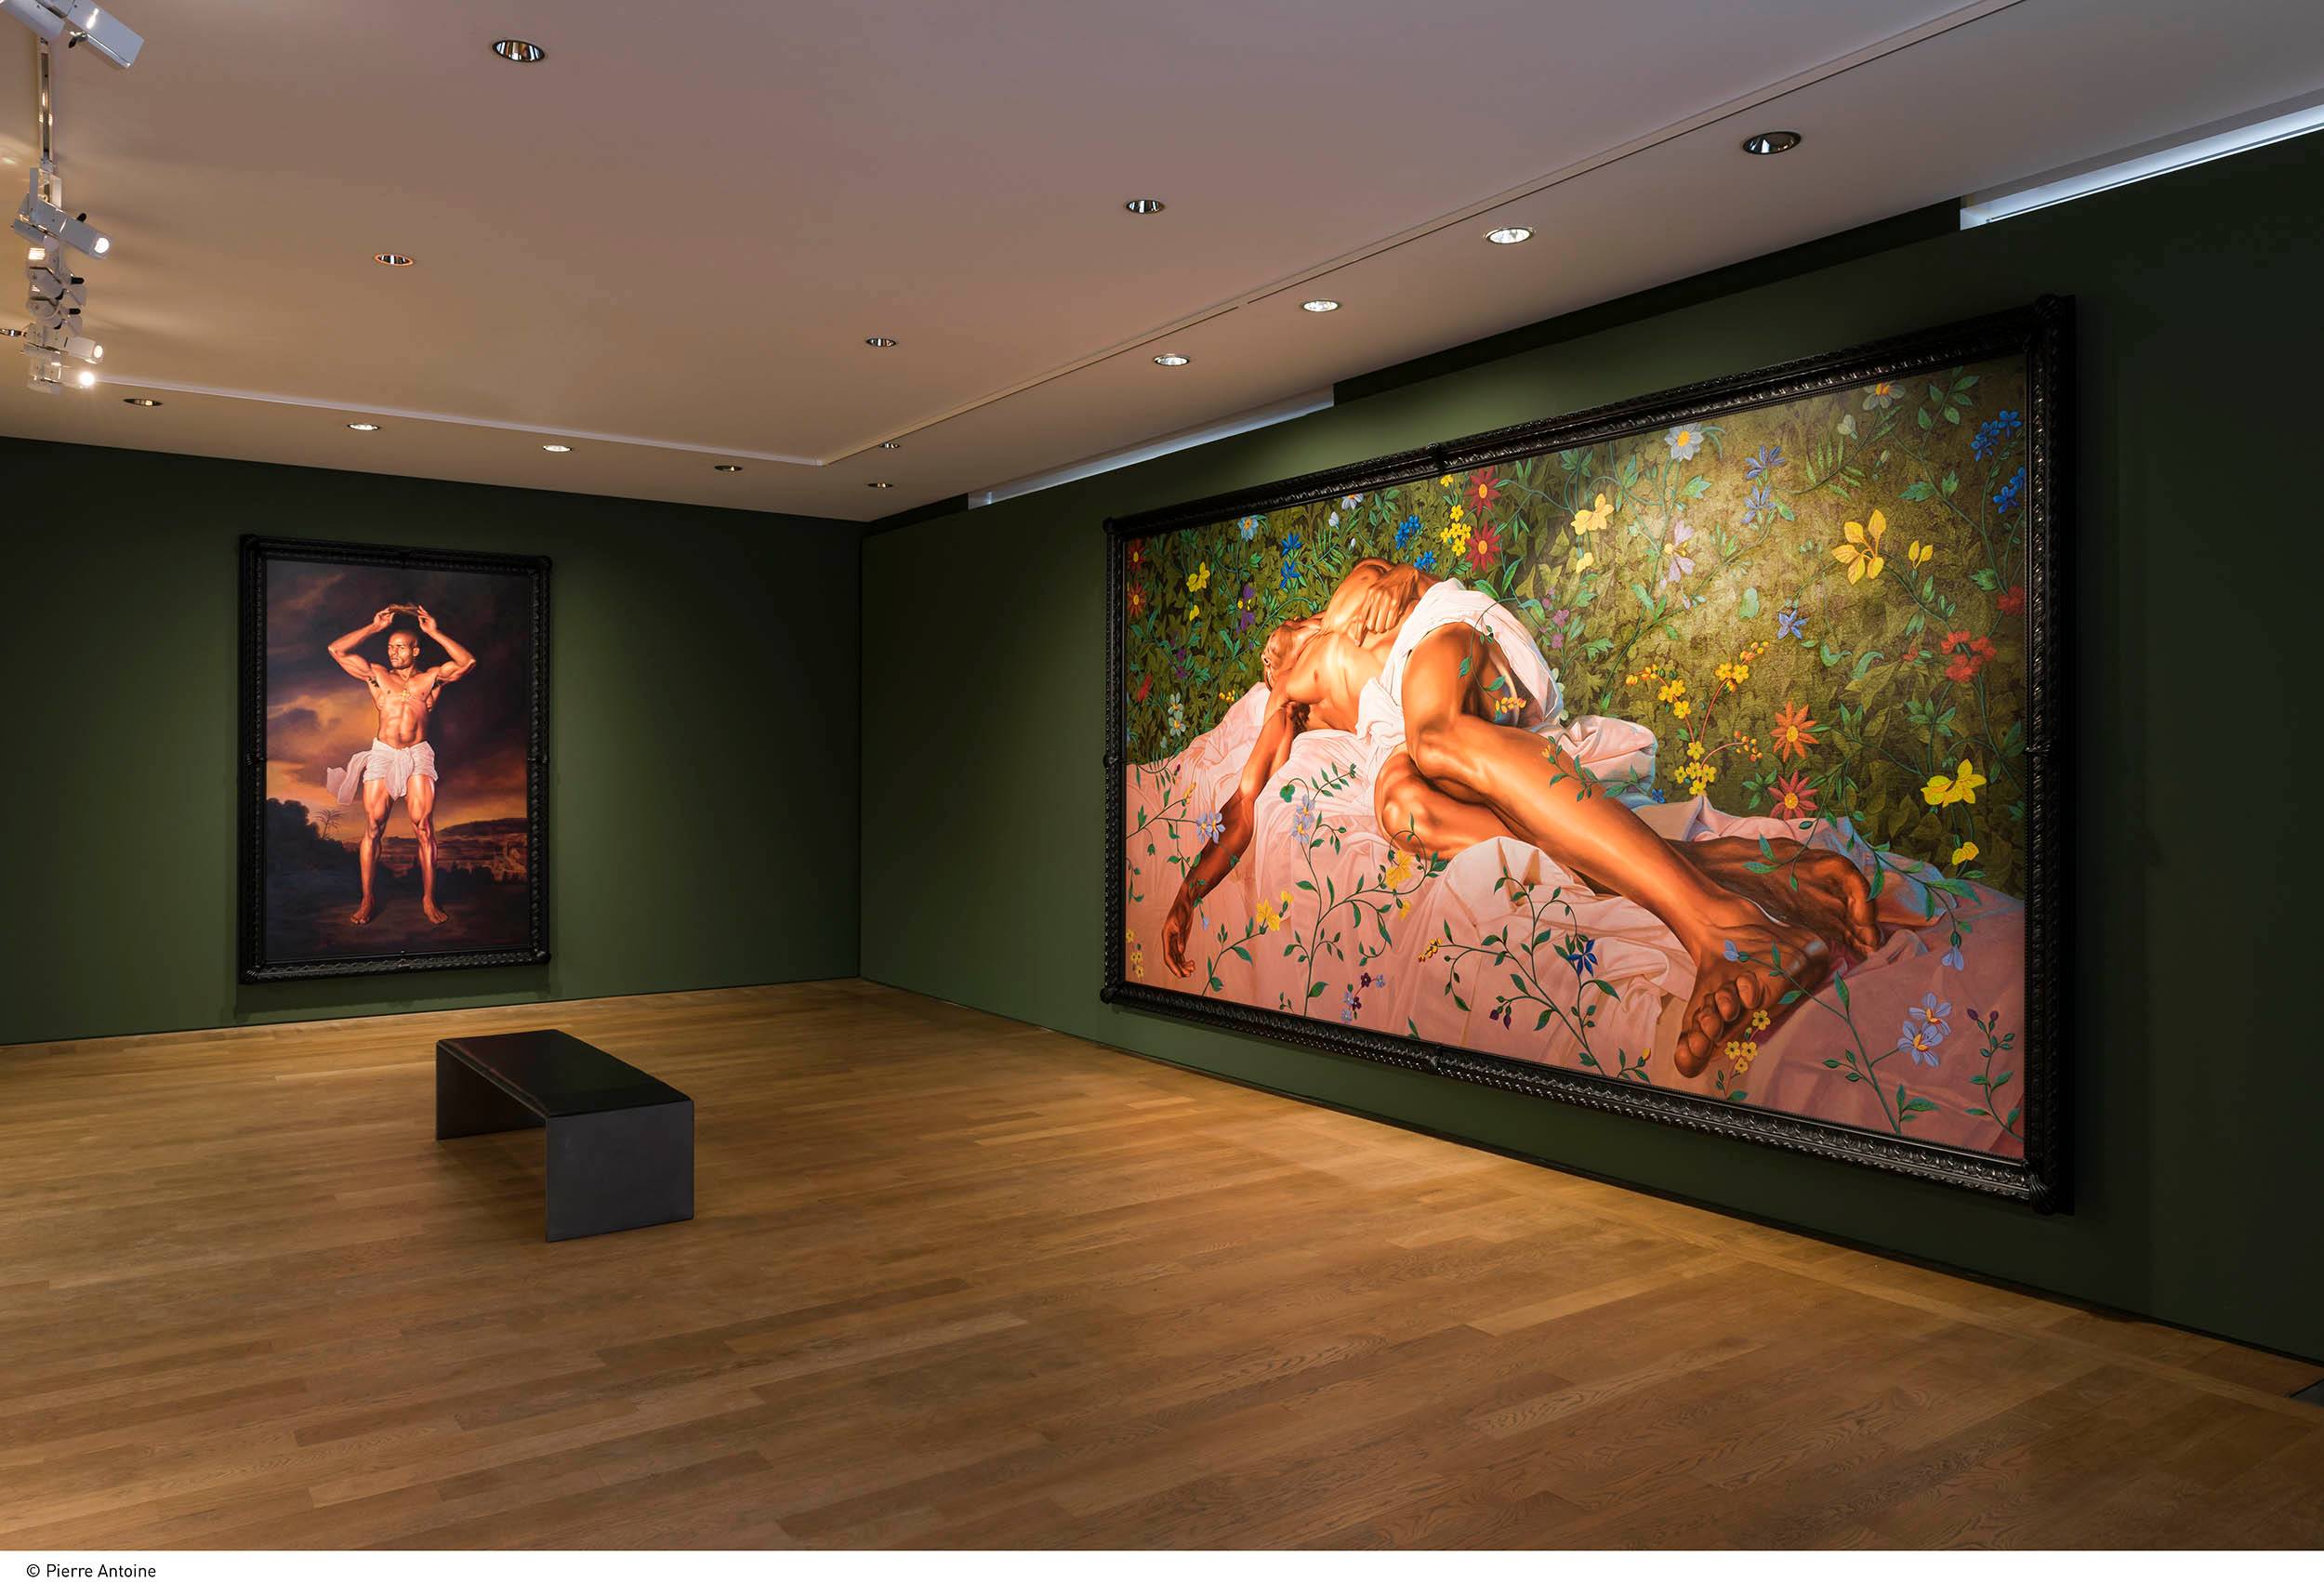 View of the “Lamentation” exhibition by Kehinde Wiley held from October 20th, 2016 to January 15th, 2017 at the Petit Palais, Paris, © Pierre Antoine.